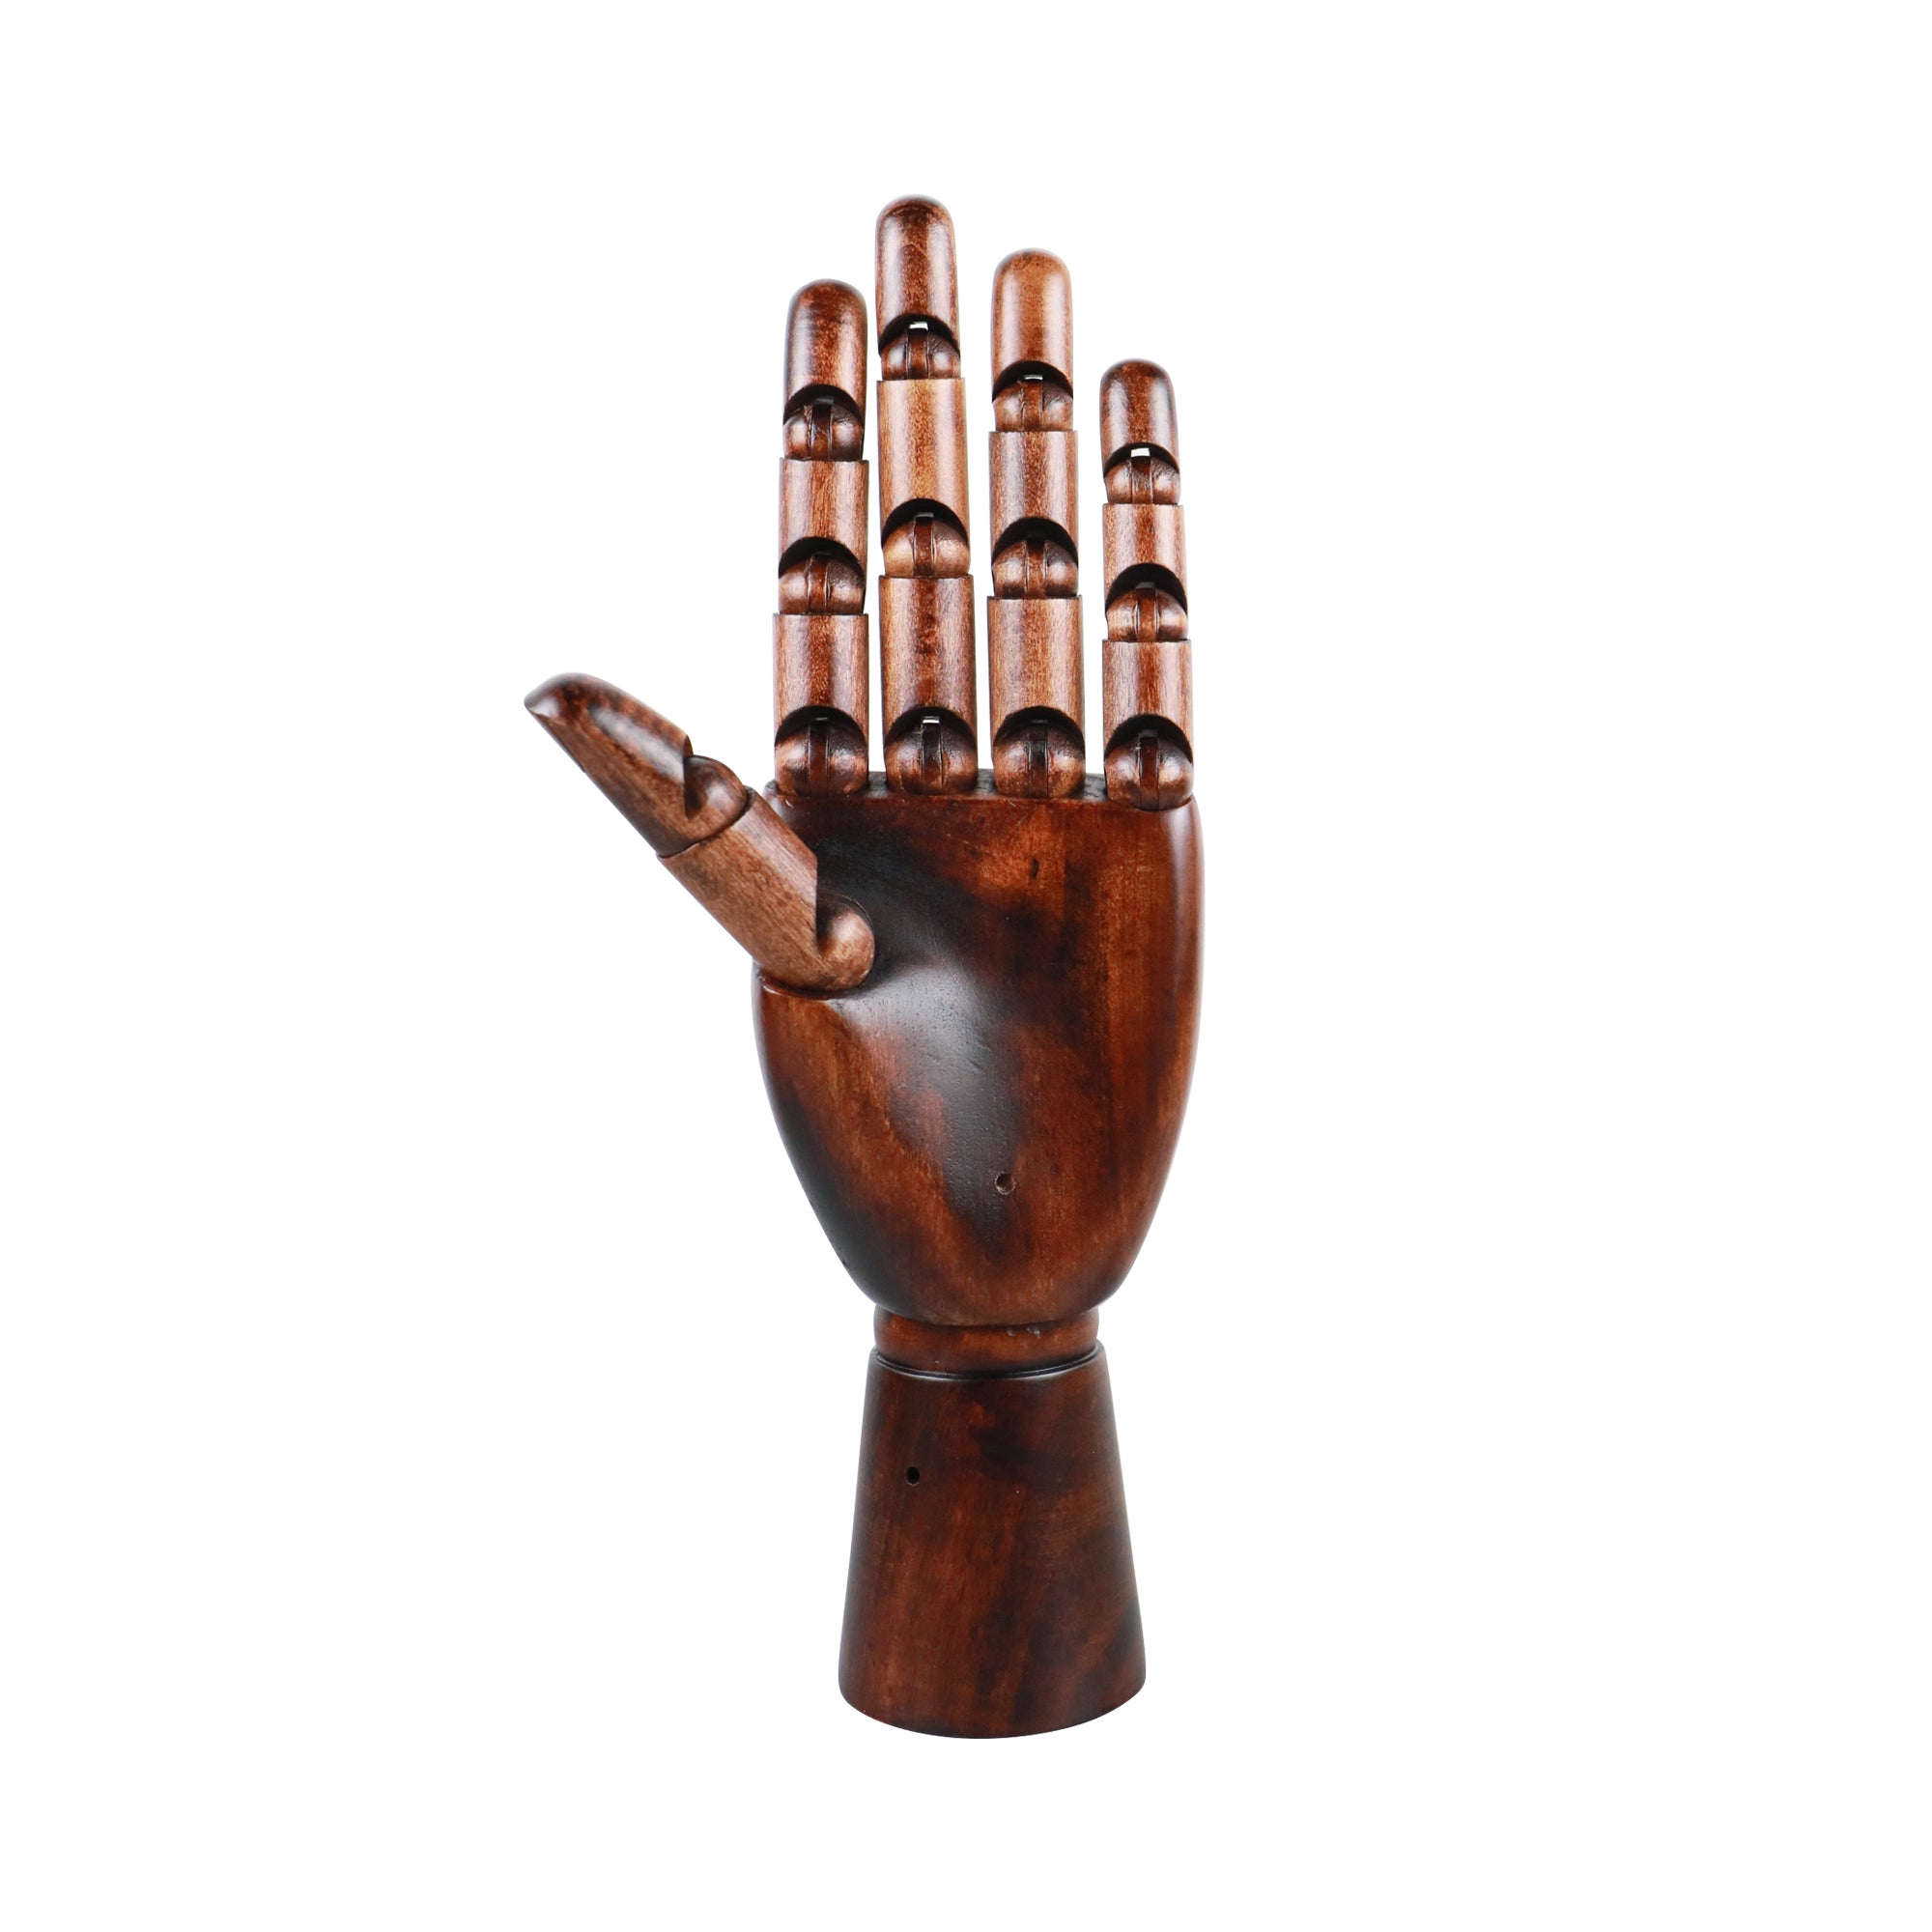 Mannequin with Flexible Wooden Fingers for Drawing, Art Supplies, Artists  Wooden Manikin - Perfect for Home Decoration/Drawing The Human Figure